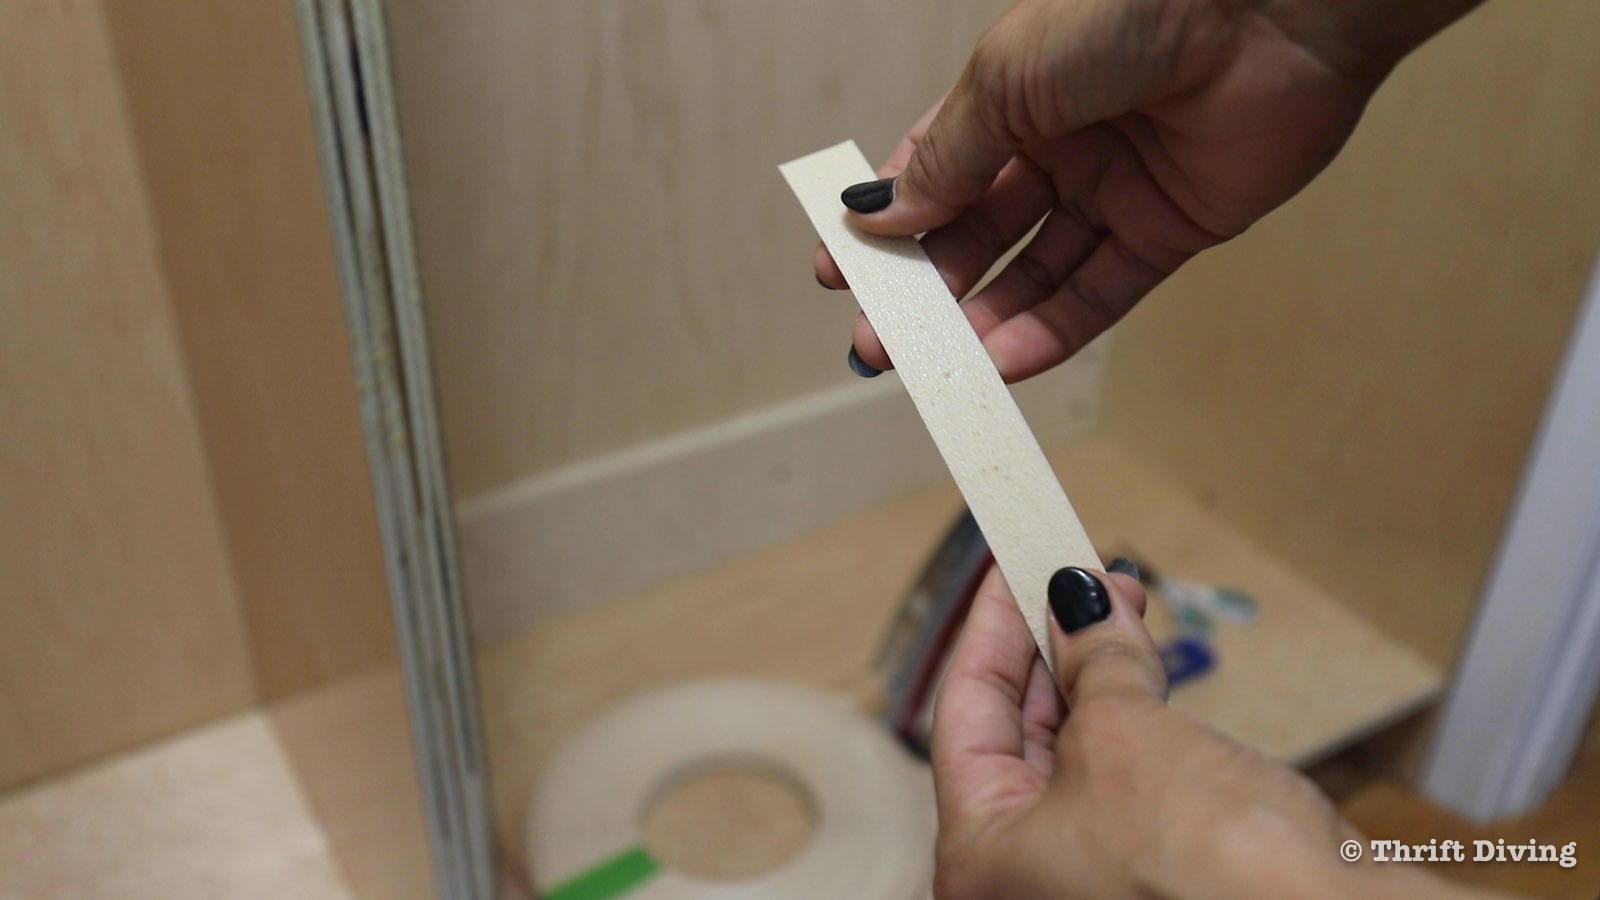 How to Build a Walk-in Closet Organizer From Scratch - Use a hot iron to attach edge banding to unfinished exposed edges. Trim with edge band trimmer or utility knife. - Thrift Diving